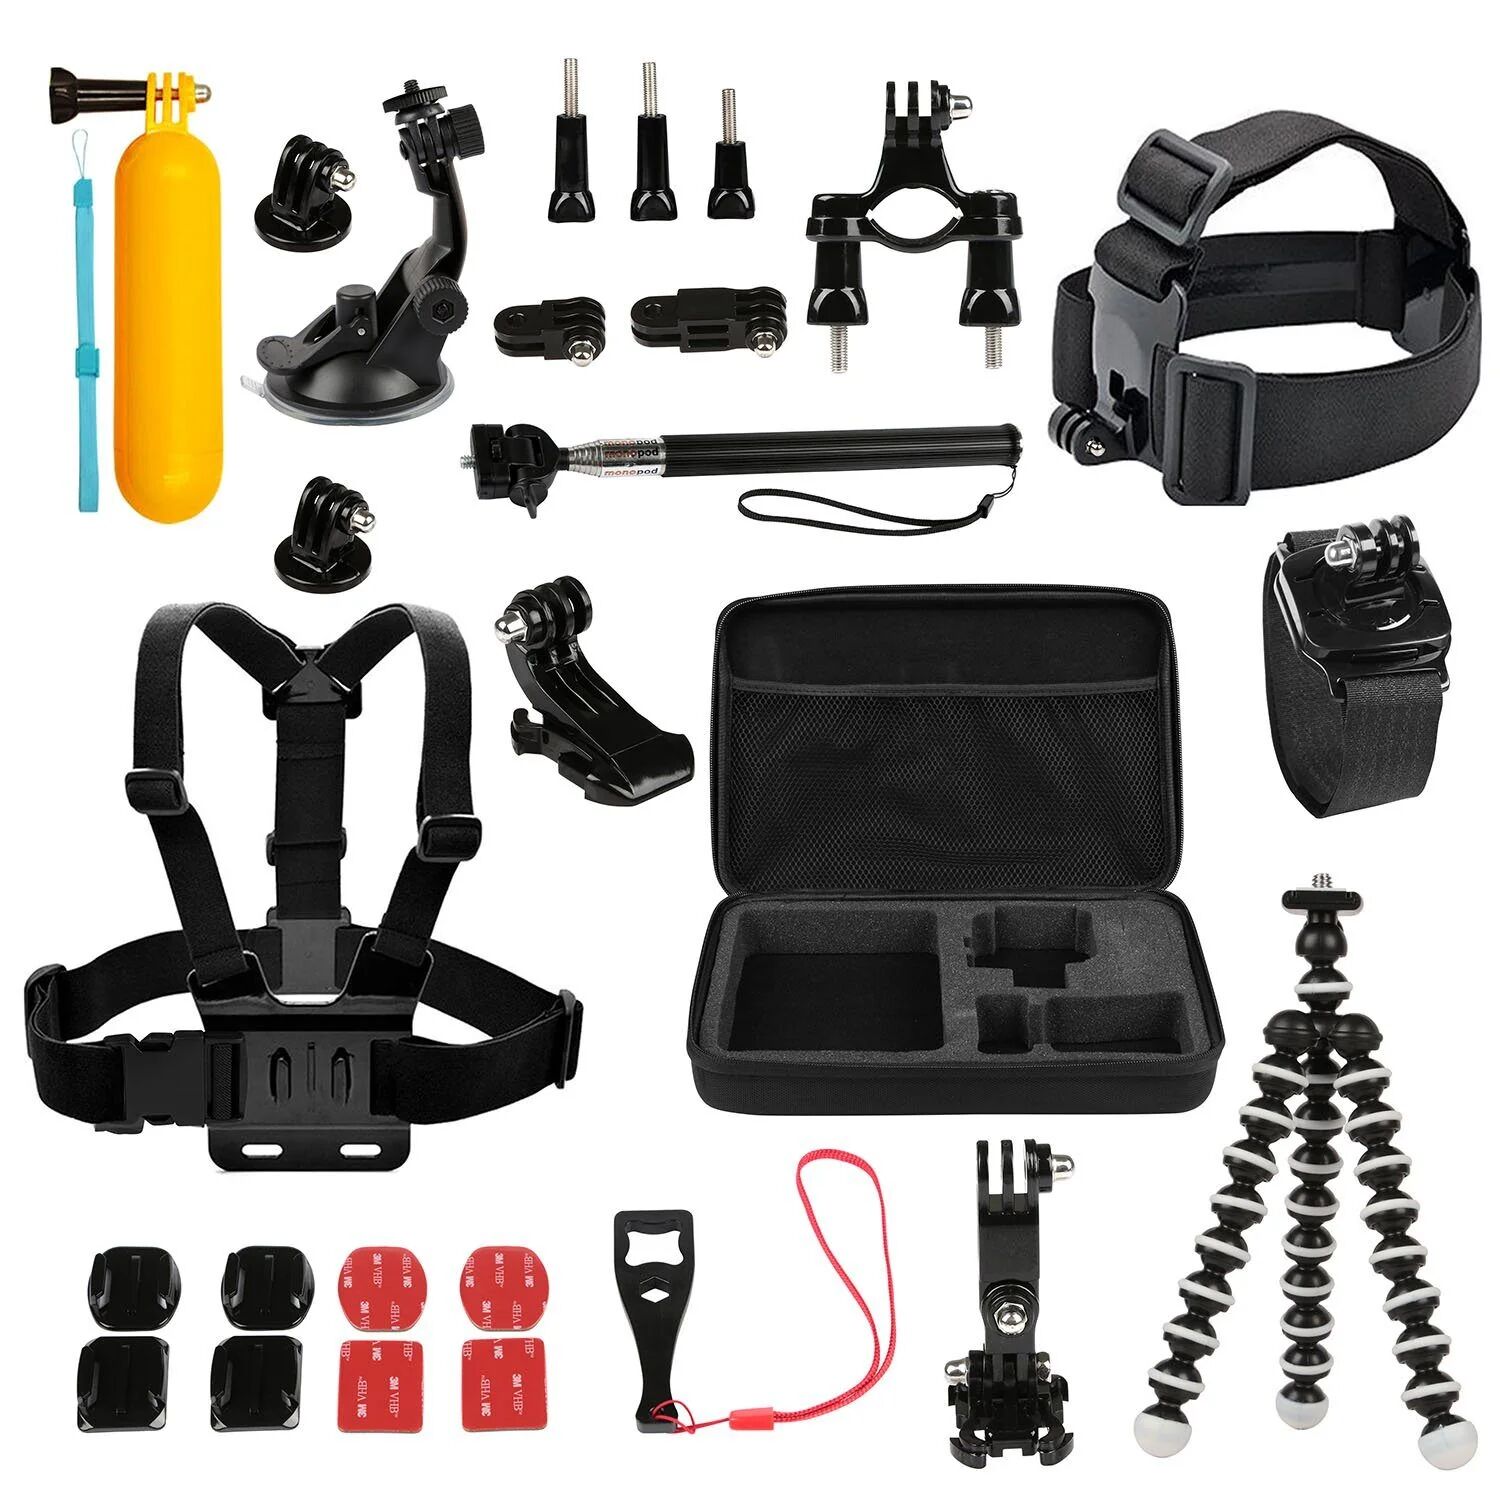 DailySale 26-in-1 Mount Accessory Kit For GoPro Camera